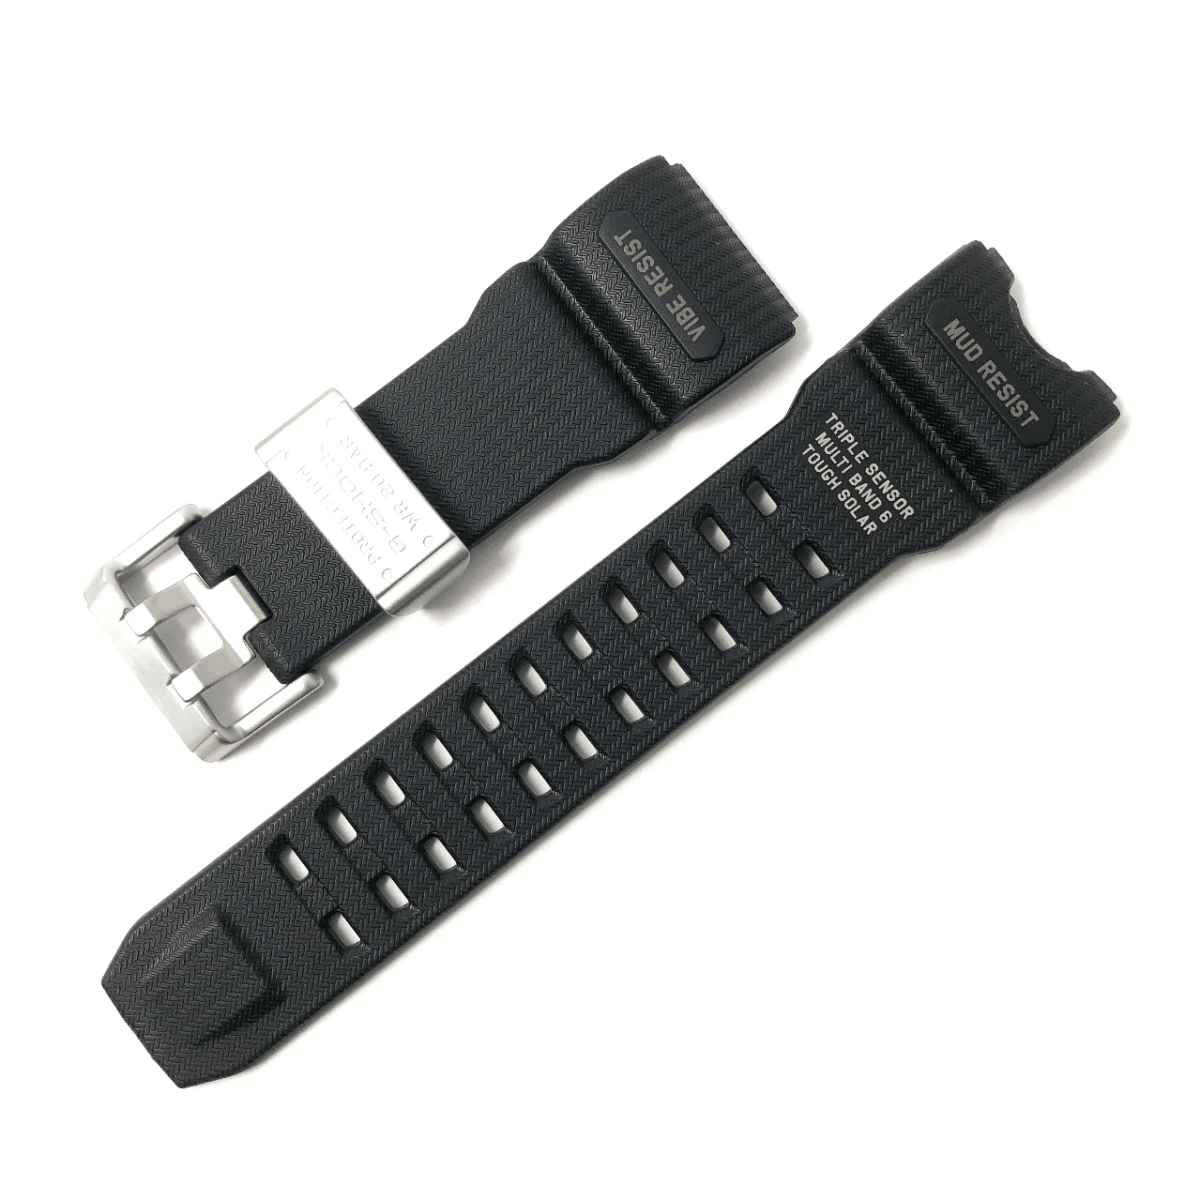 Casio Watch Strap G Shock Genuine Black Replacement 10632705 fits GWG 1000 1A 194509276730 2 - Maddisons UK